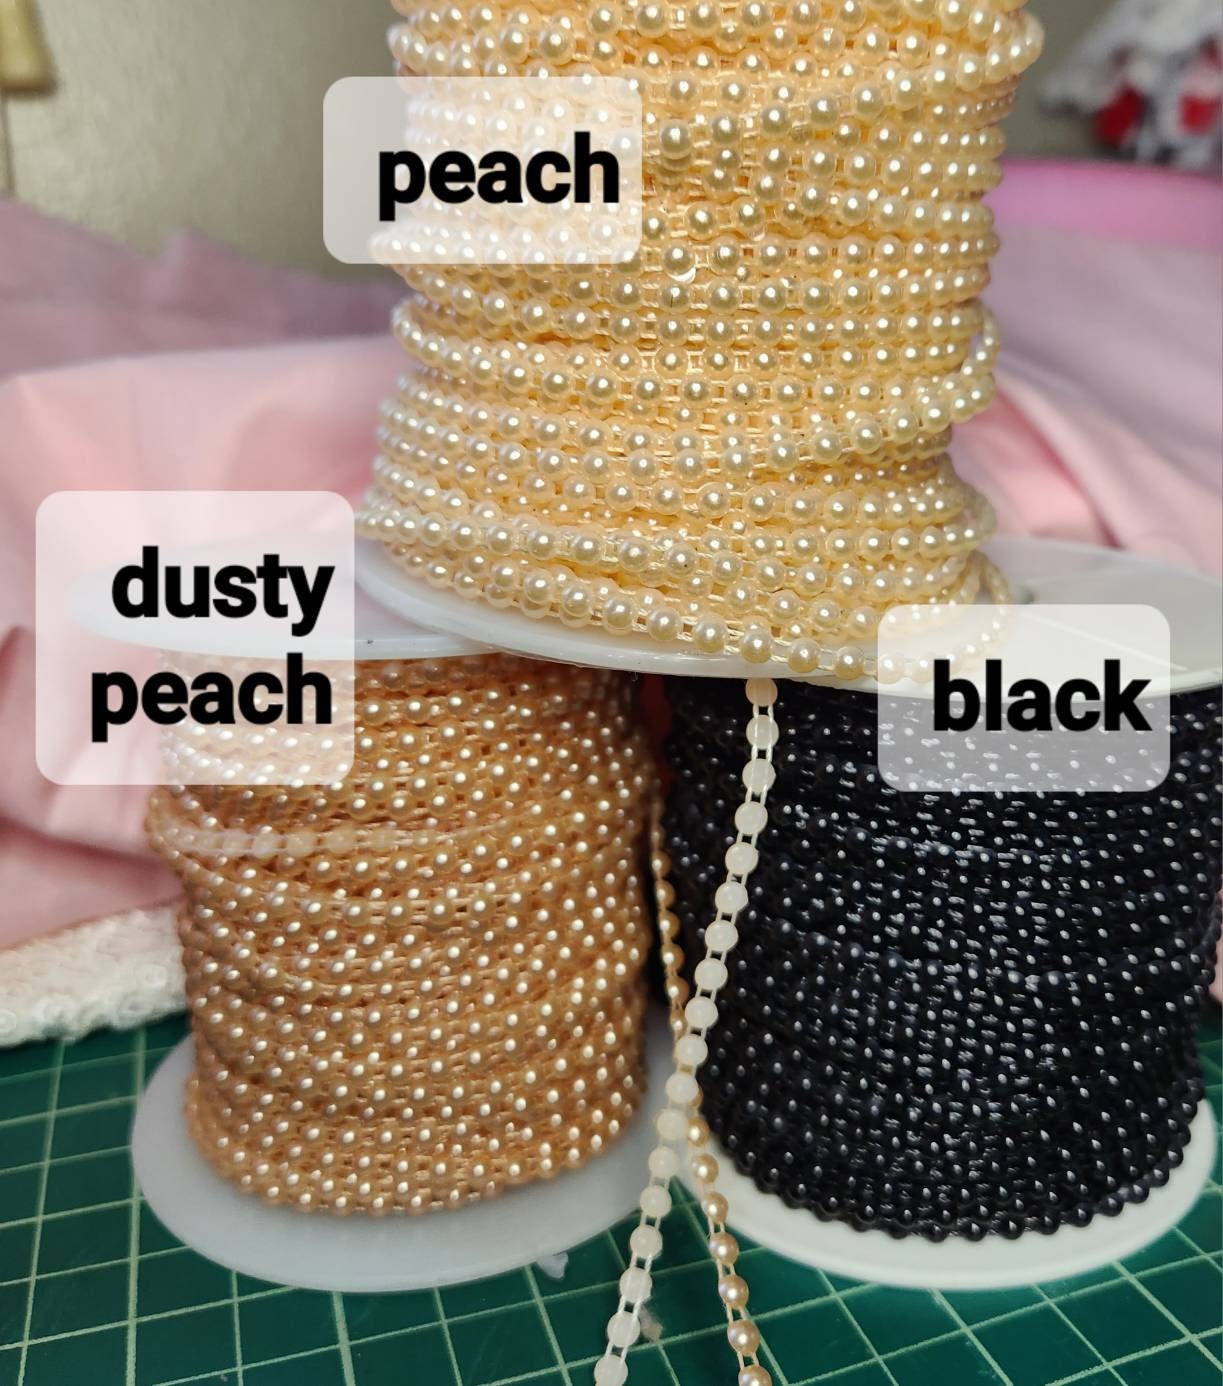 Articyard 5700 AB Black Half Pearls for Crafts - Flatback Pearls/Jewels  Pearls for Nails, DIY Accessory, Art and Fashion Projects - Neatly  Organized